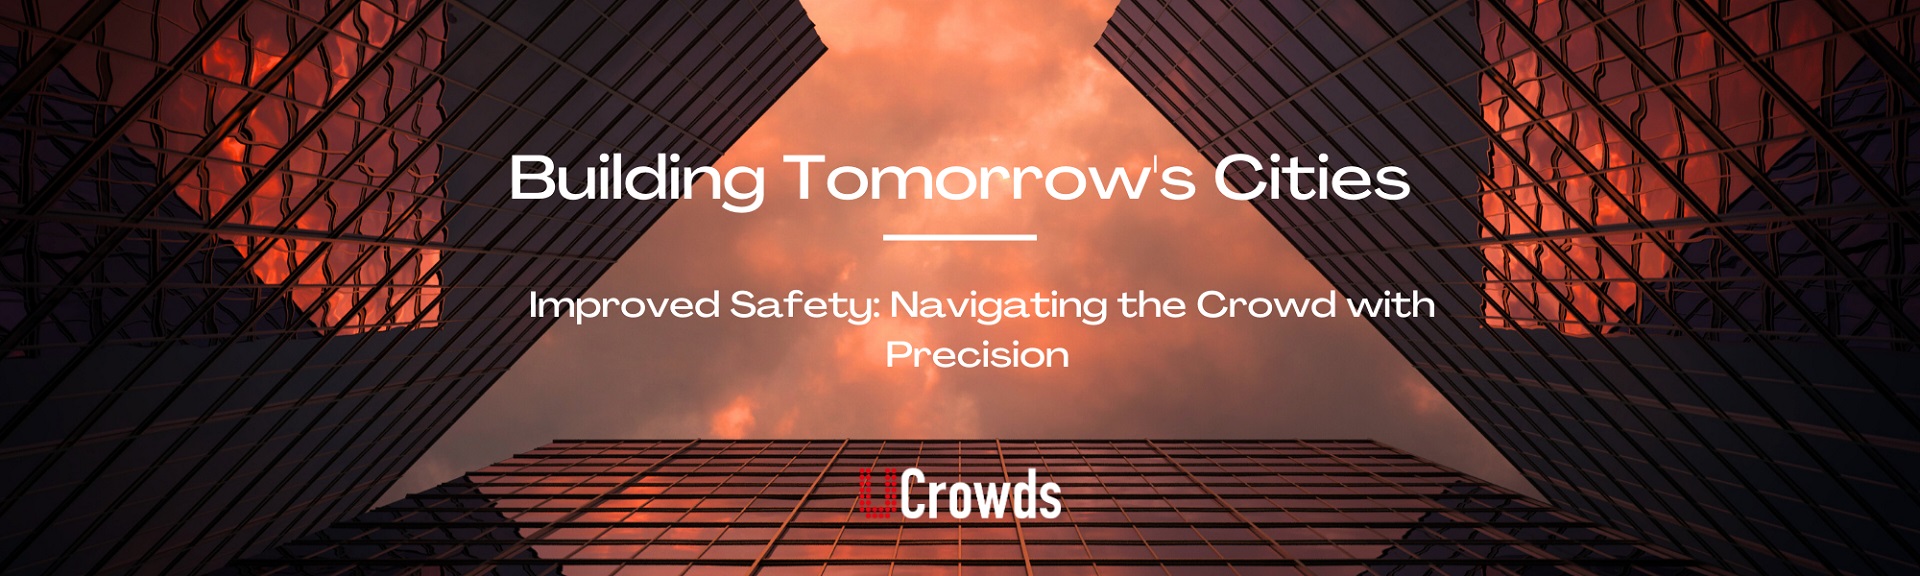 Building Tomorrow's Cities - Navigating the Crowds with Precision image